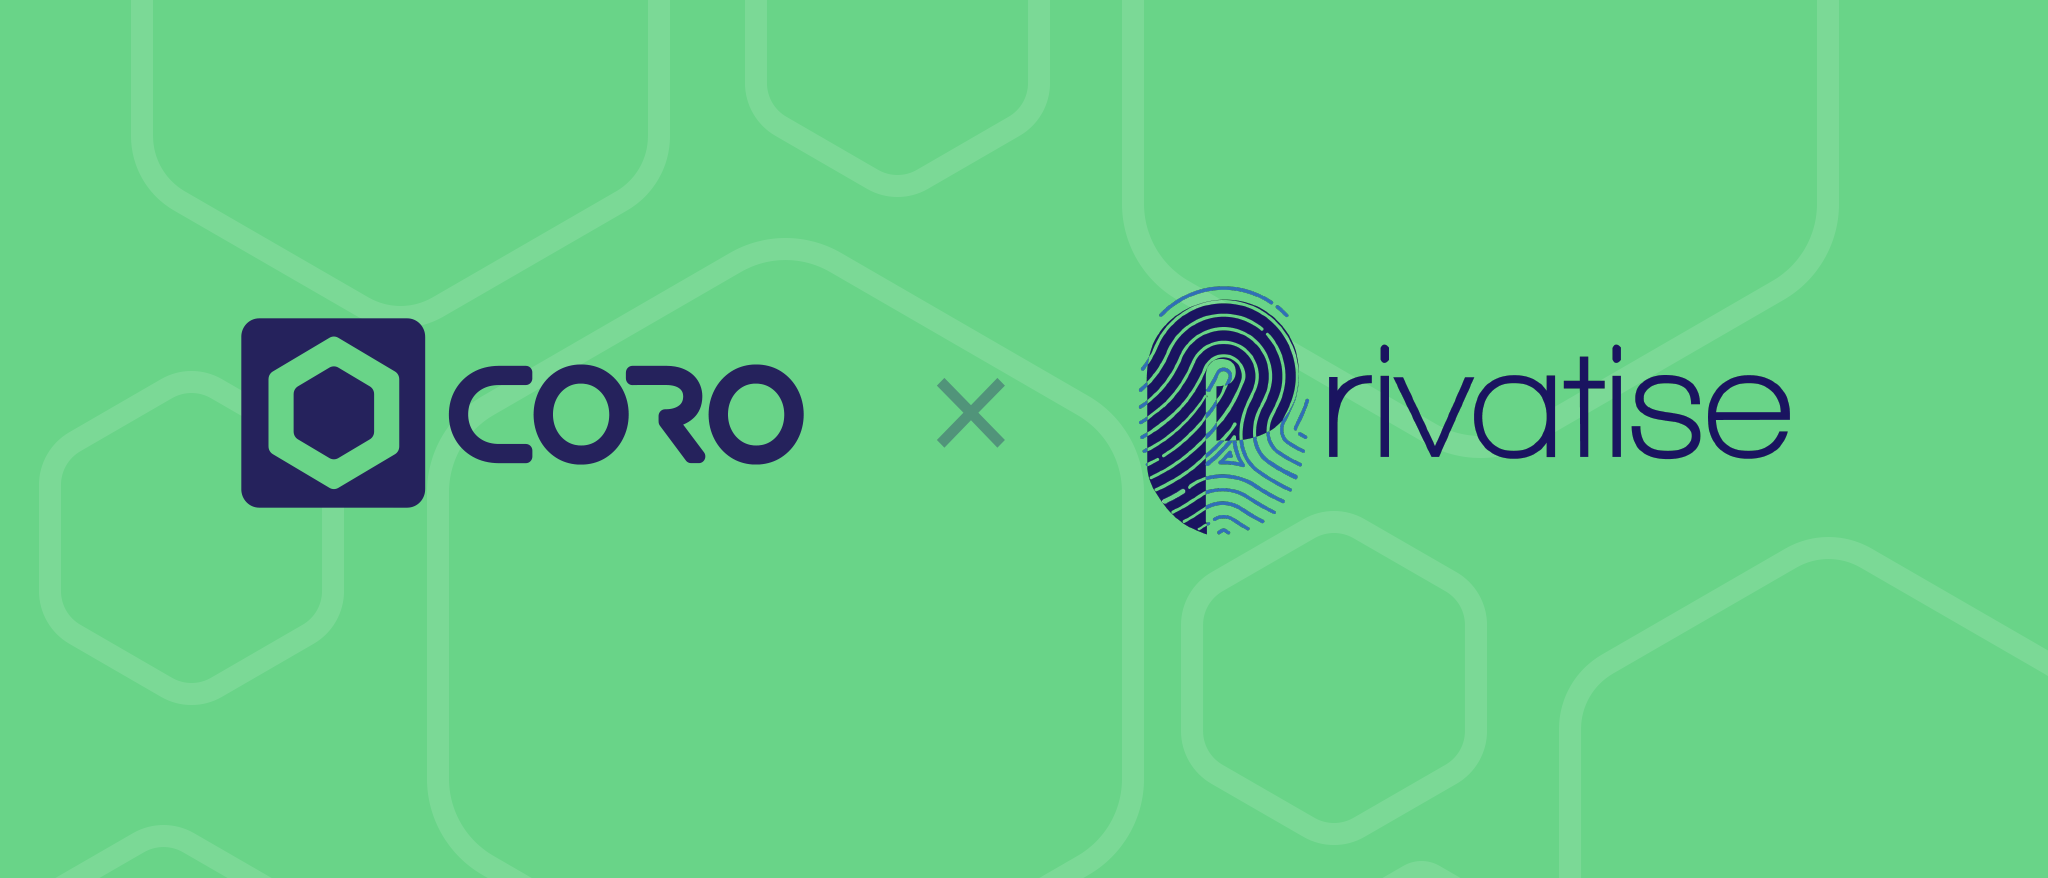 Coro Acquires Network Security Startup Privatise